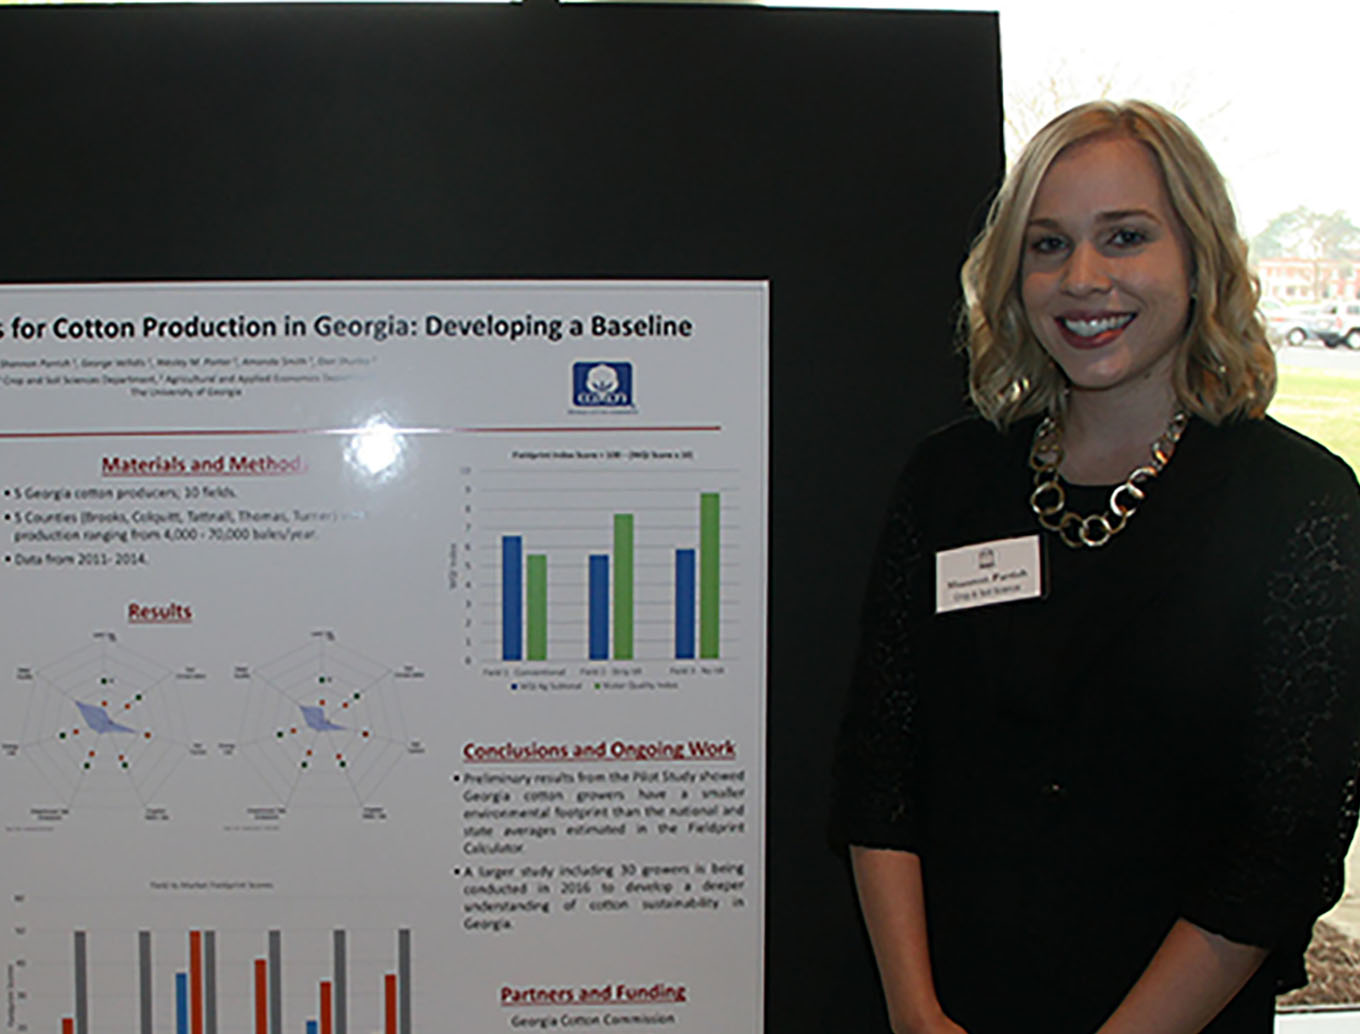 UGA graduate student Shannon Parrish stands next to her poster during the grad research event held at the UGA Tifton Campus Conference Center on March 17, 2016.